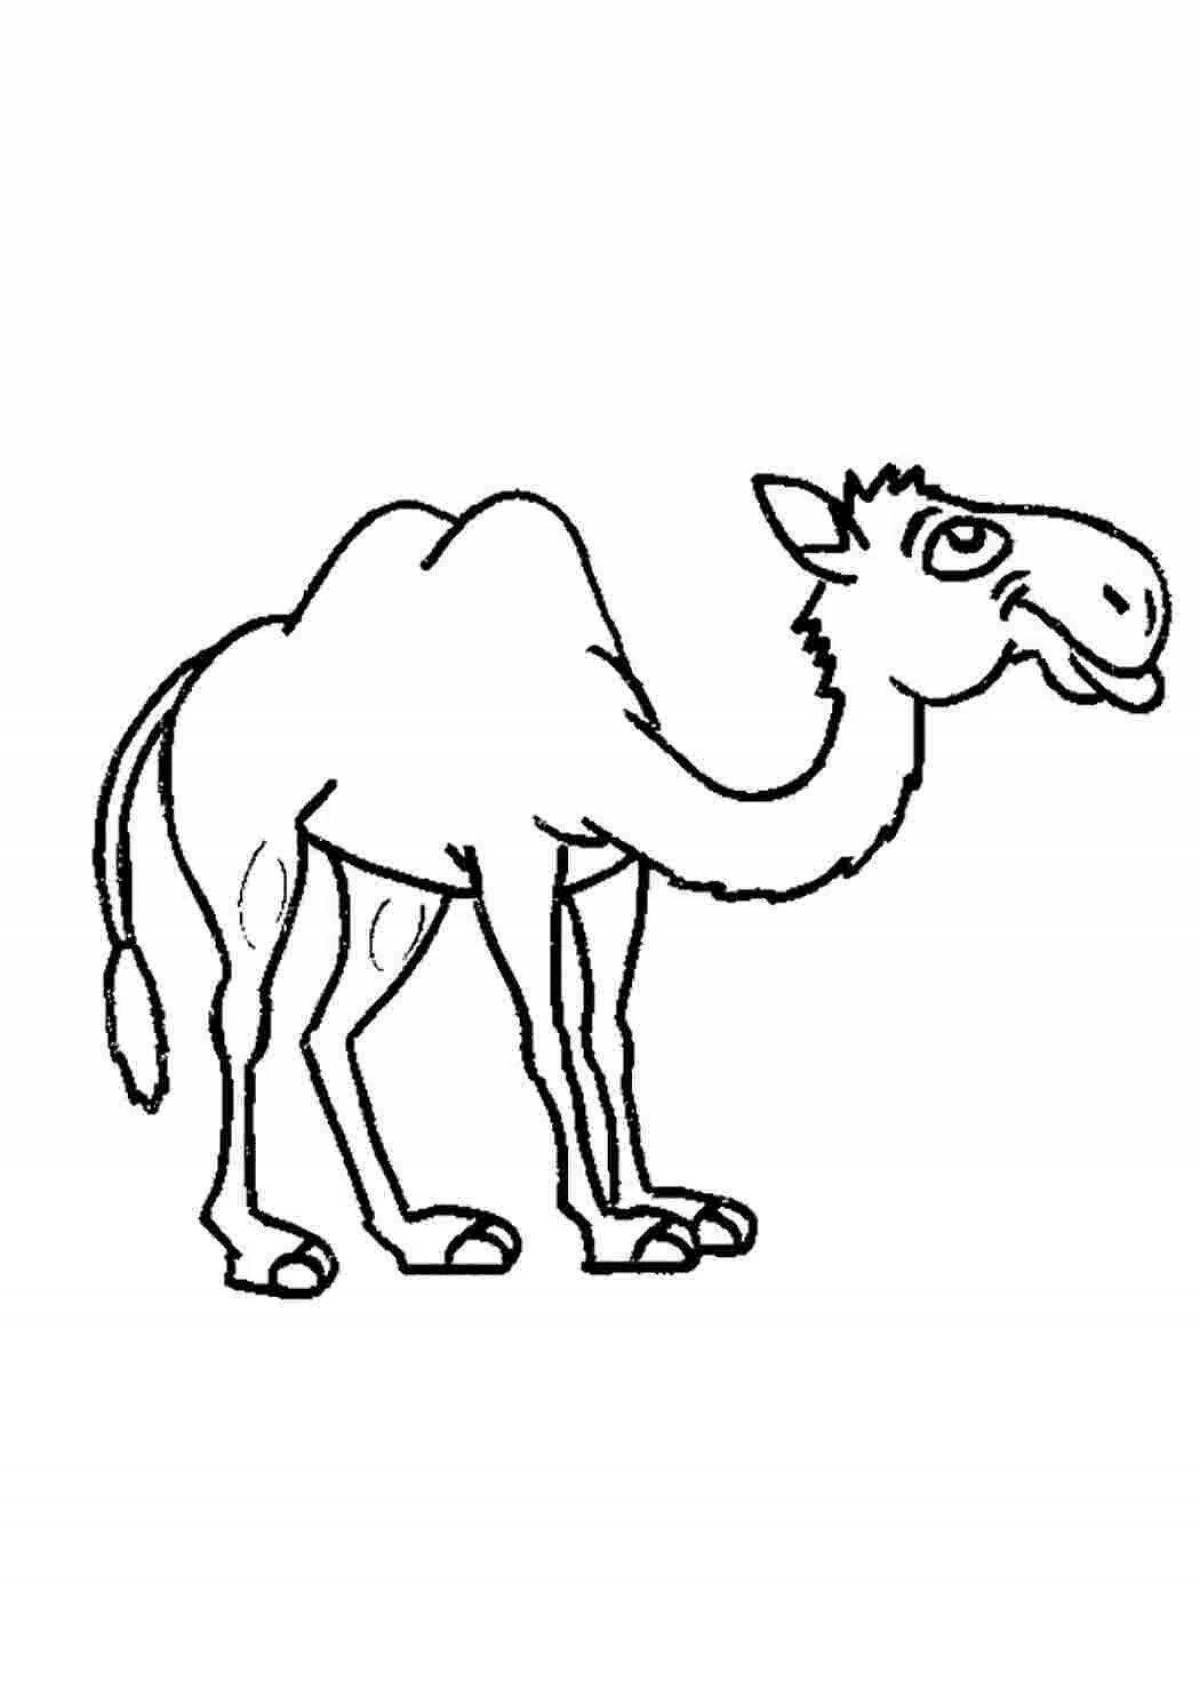 Coloring page gorgeous camel